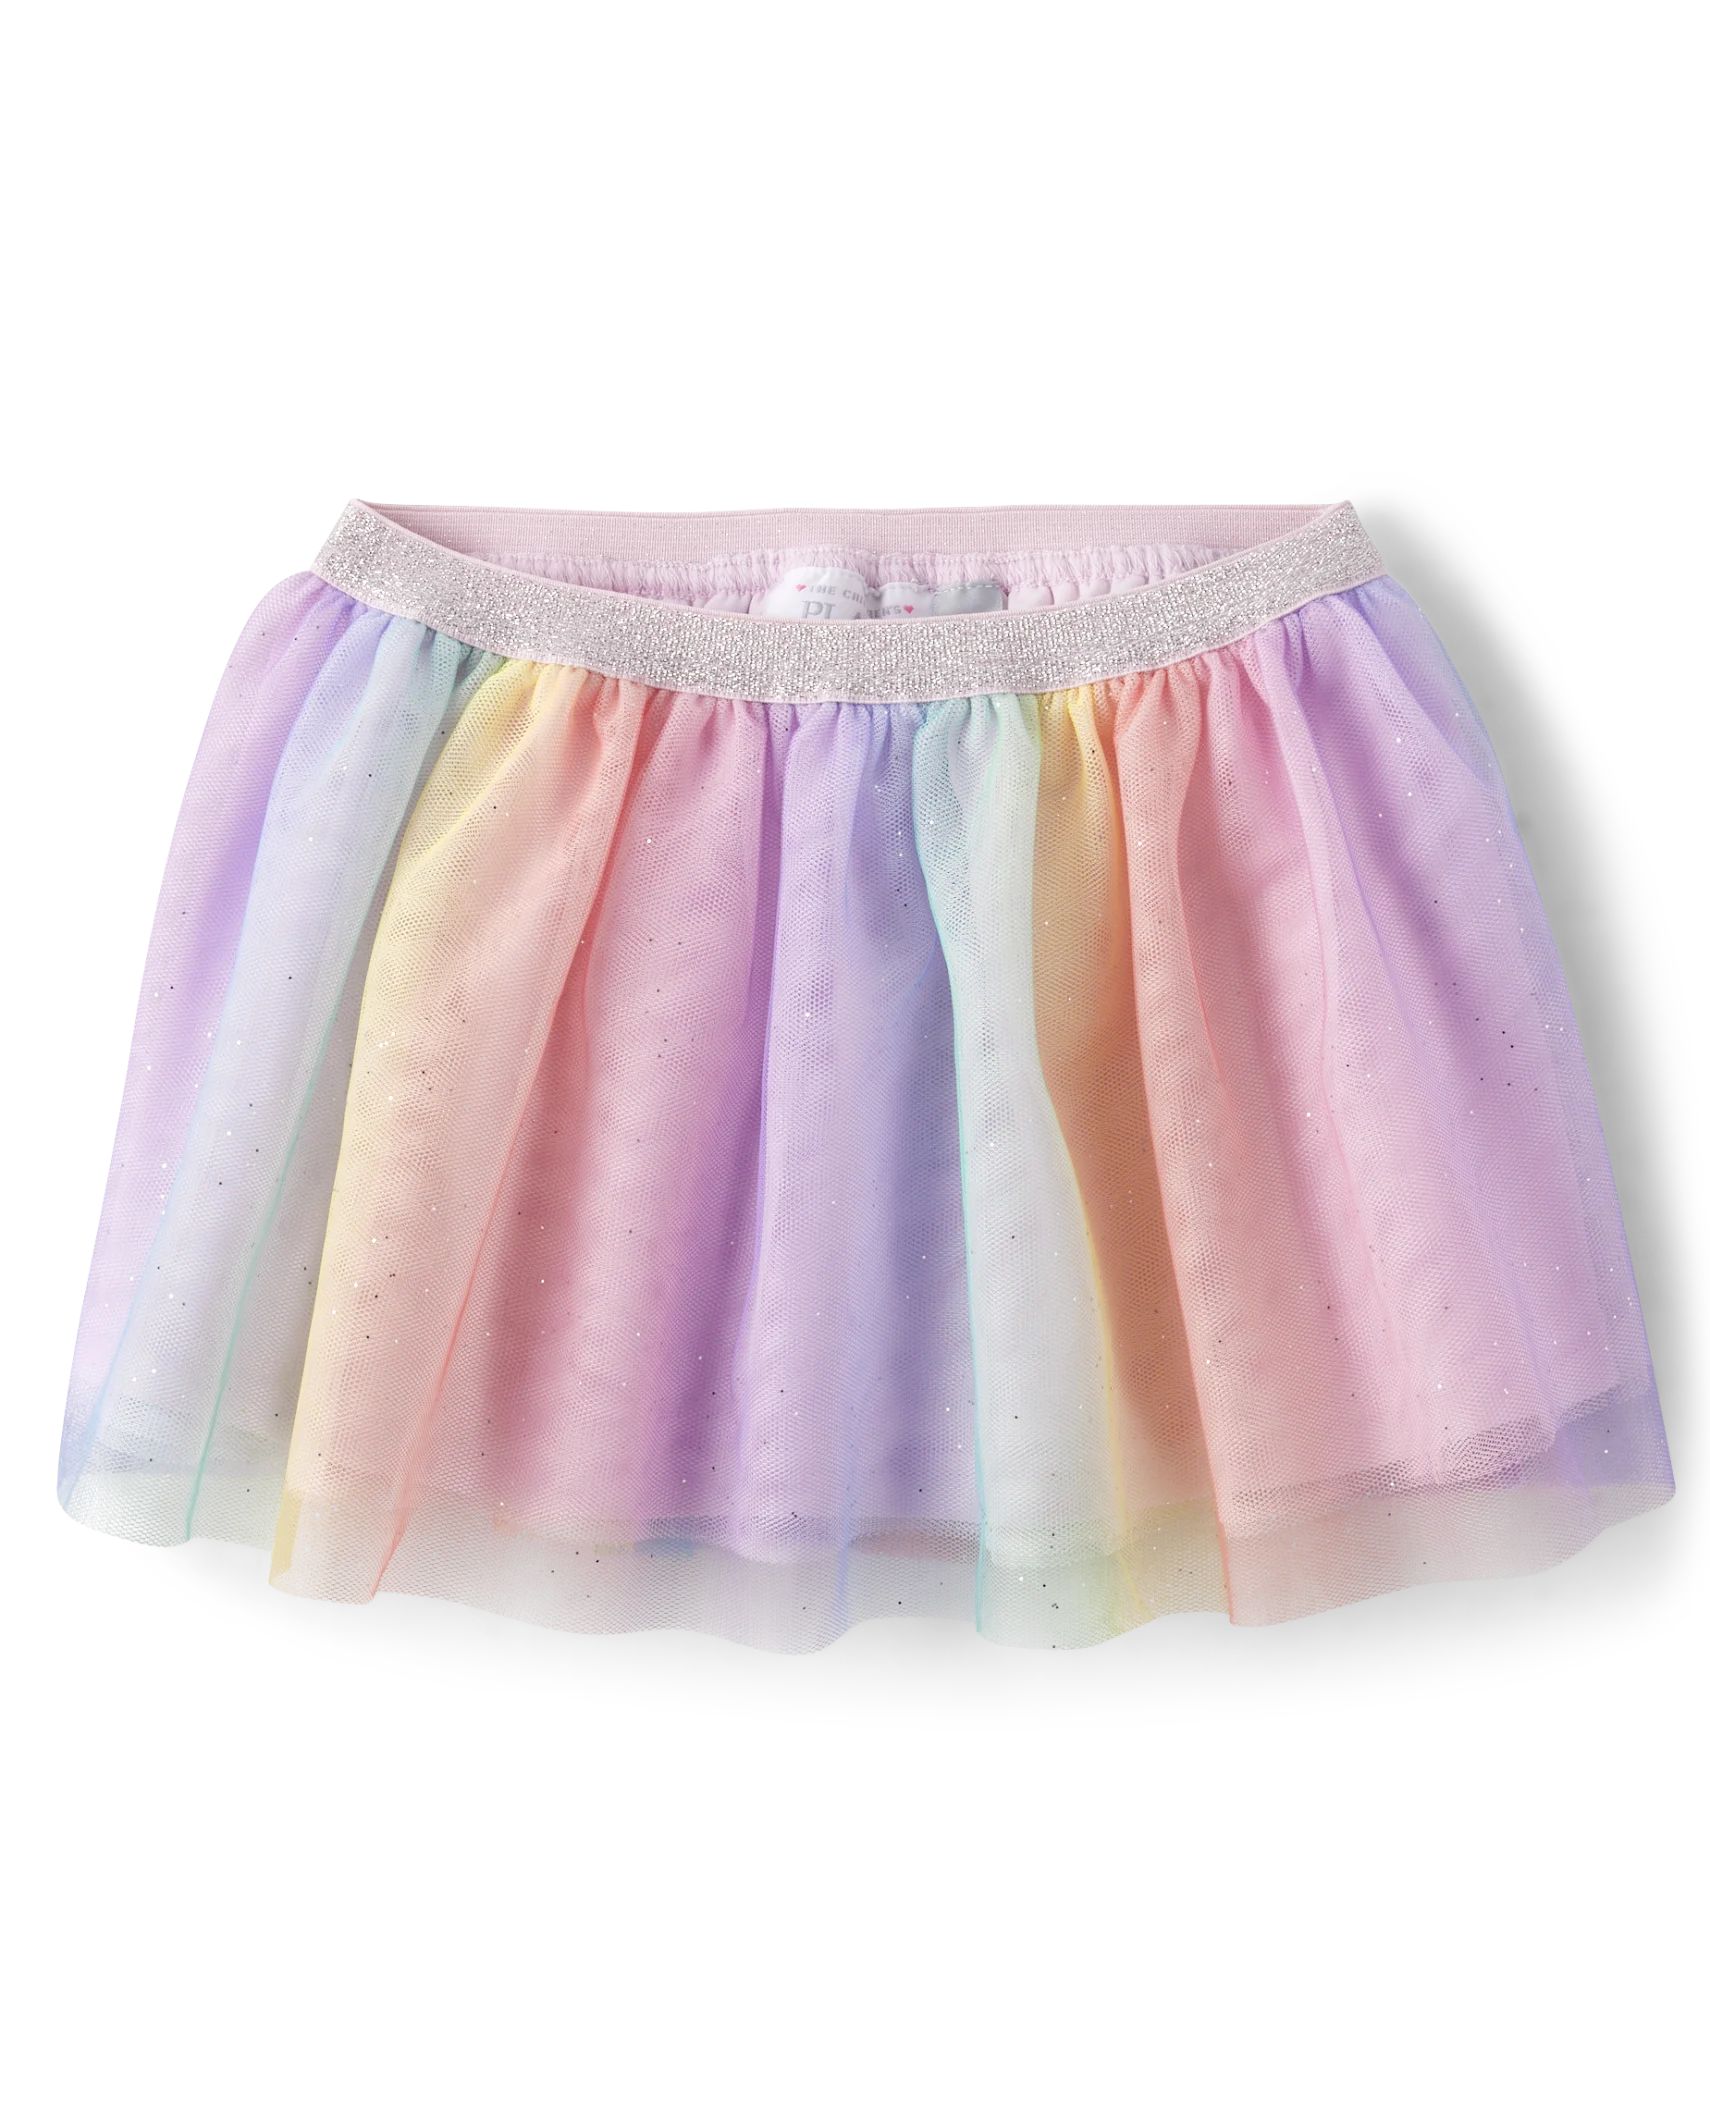 Toddler Girls Rainbow Ombre Mesh Skirt - bright pink | The Children's Place